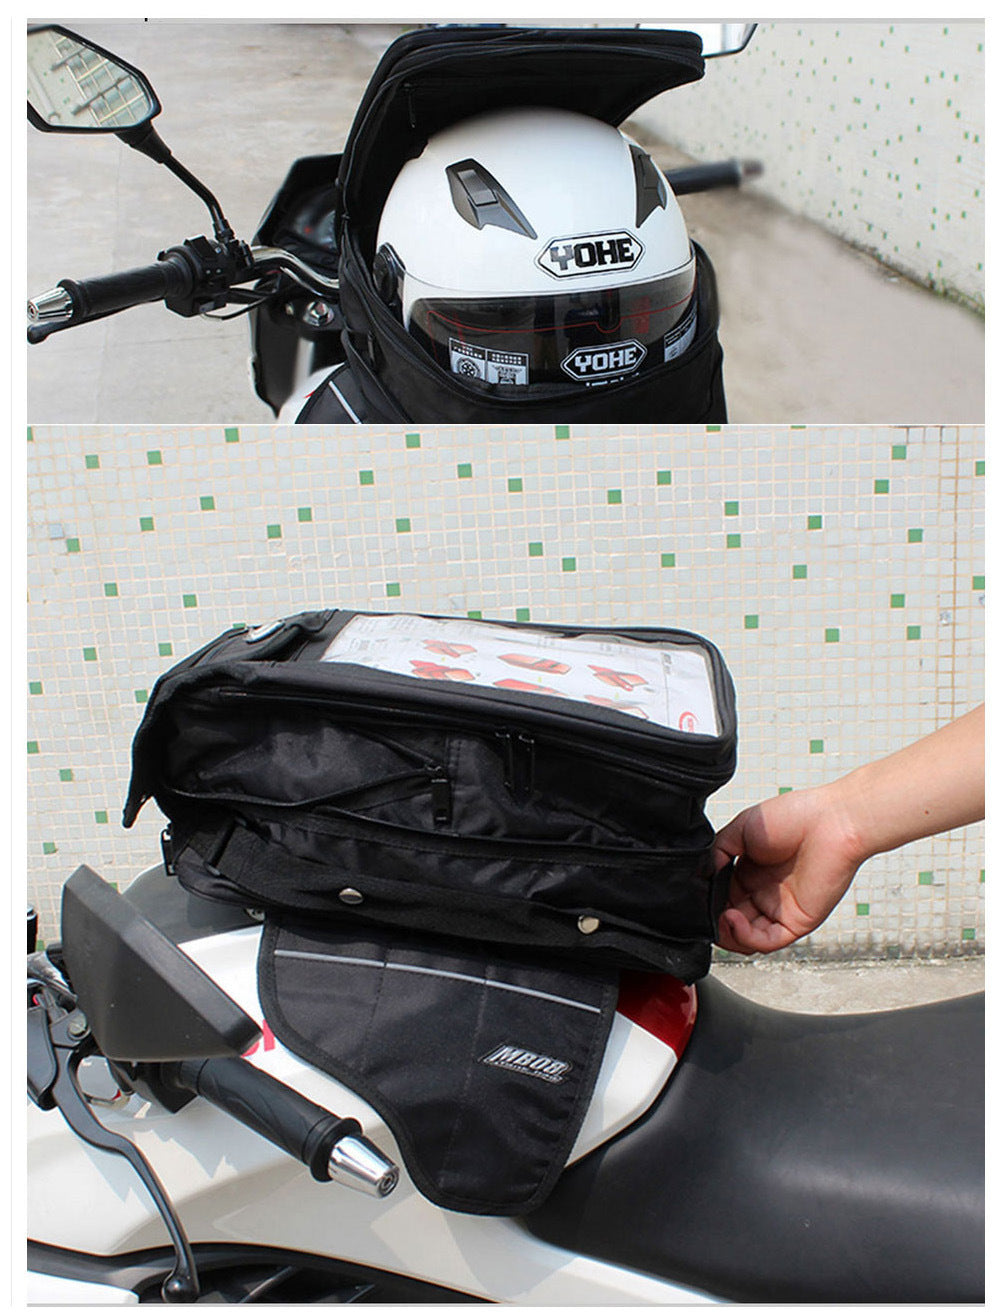 Black Motorcycle Accessories Carrying Luggage